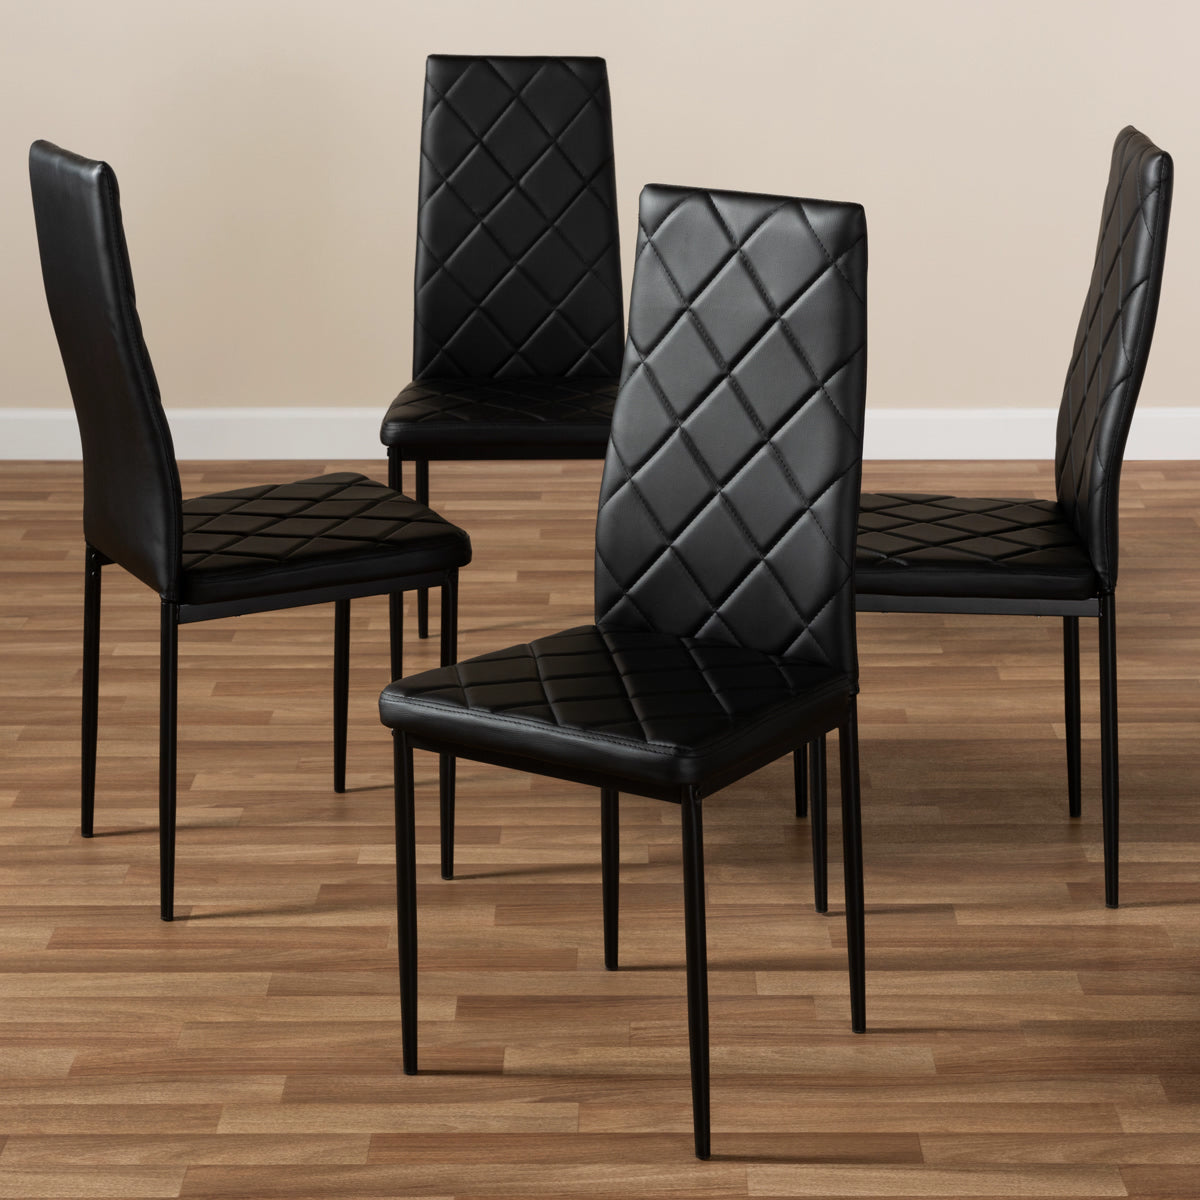 Baxton Studio Blaise Modern and Contemporary Black Faux Leather Upholstered Dining Chair (Set of 4) Baxton Studio-dining chair-Minimal And Modern - 4